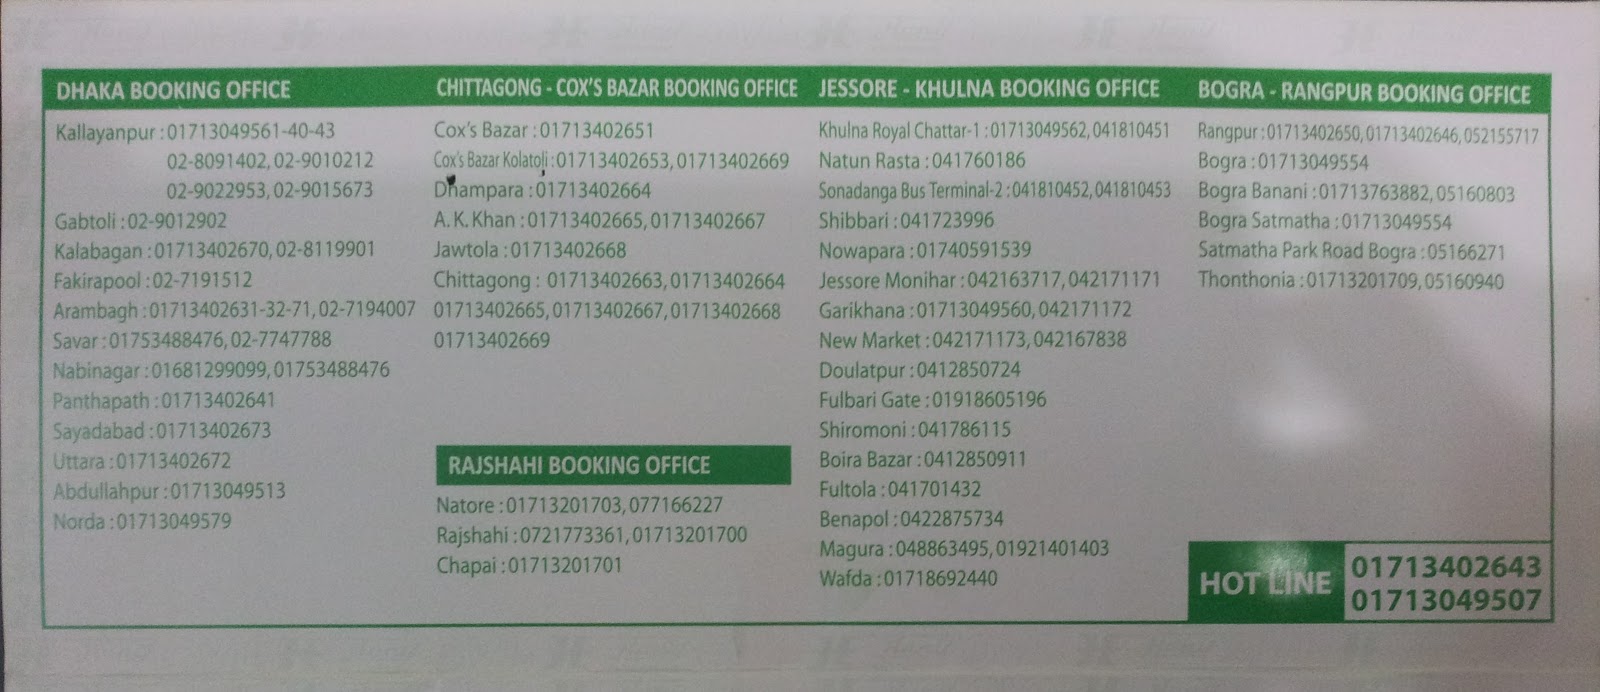 Bangladesh In My Eyes: Inter City Bus Name - Ticket Price - Bus Counters  Number